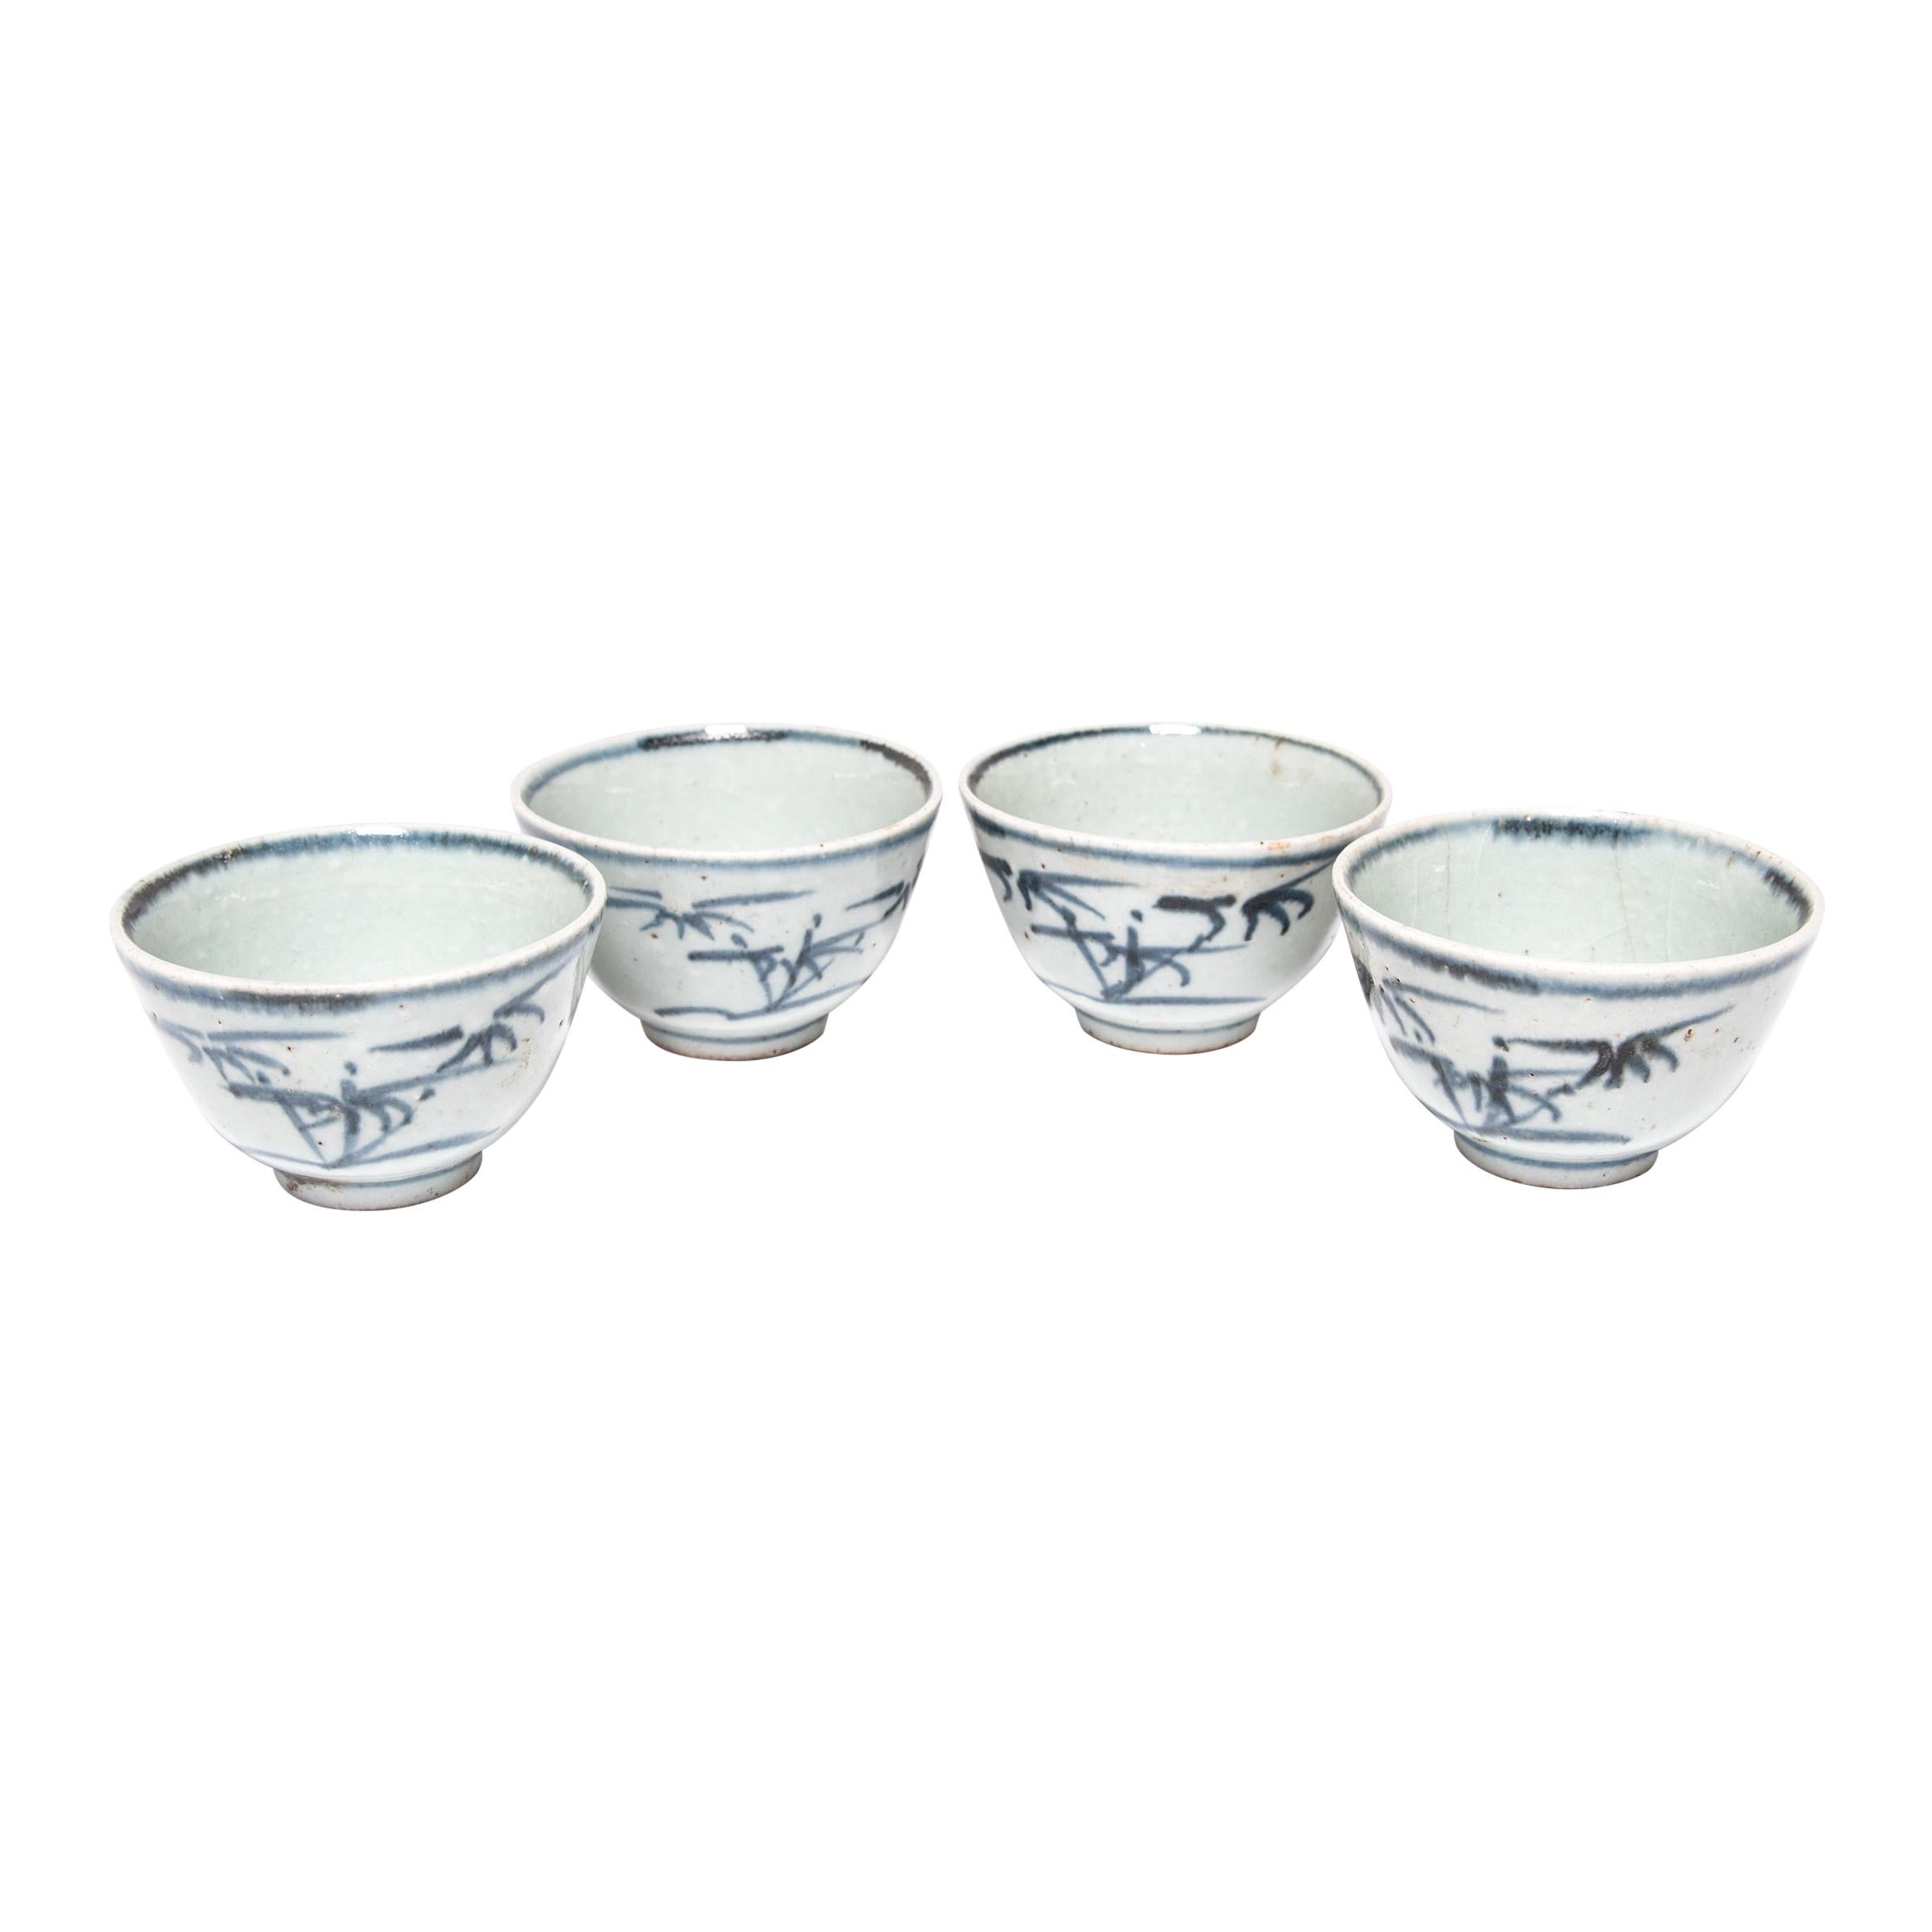 Set of Four Chinese Blue and White Tea Cups